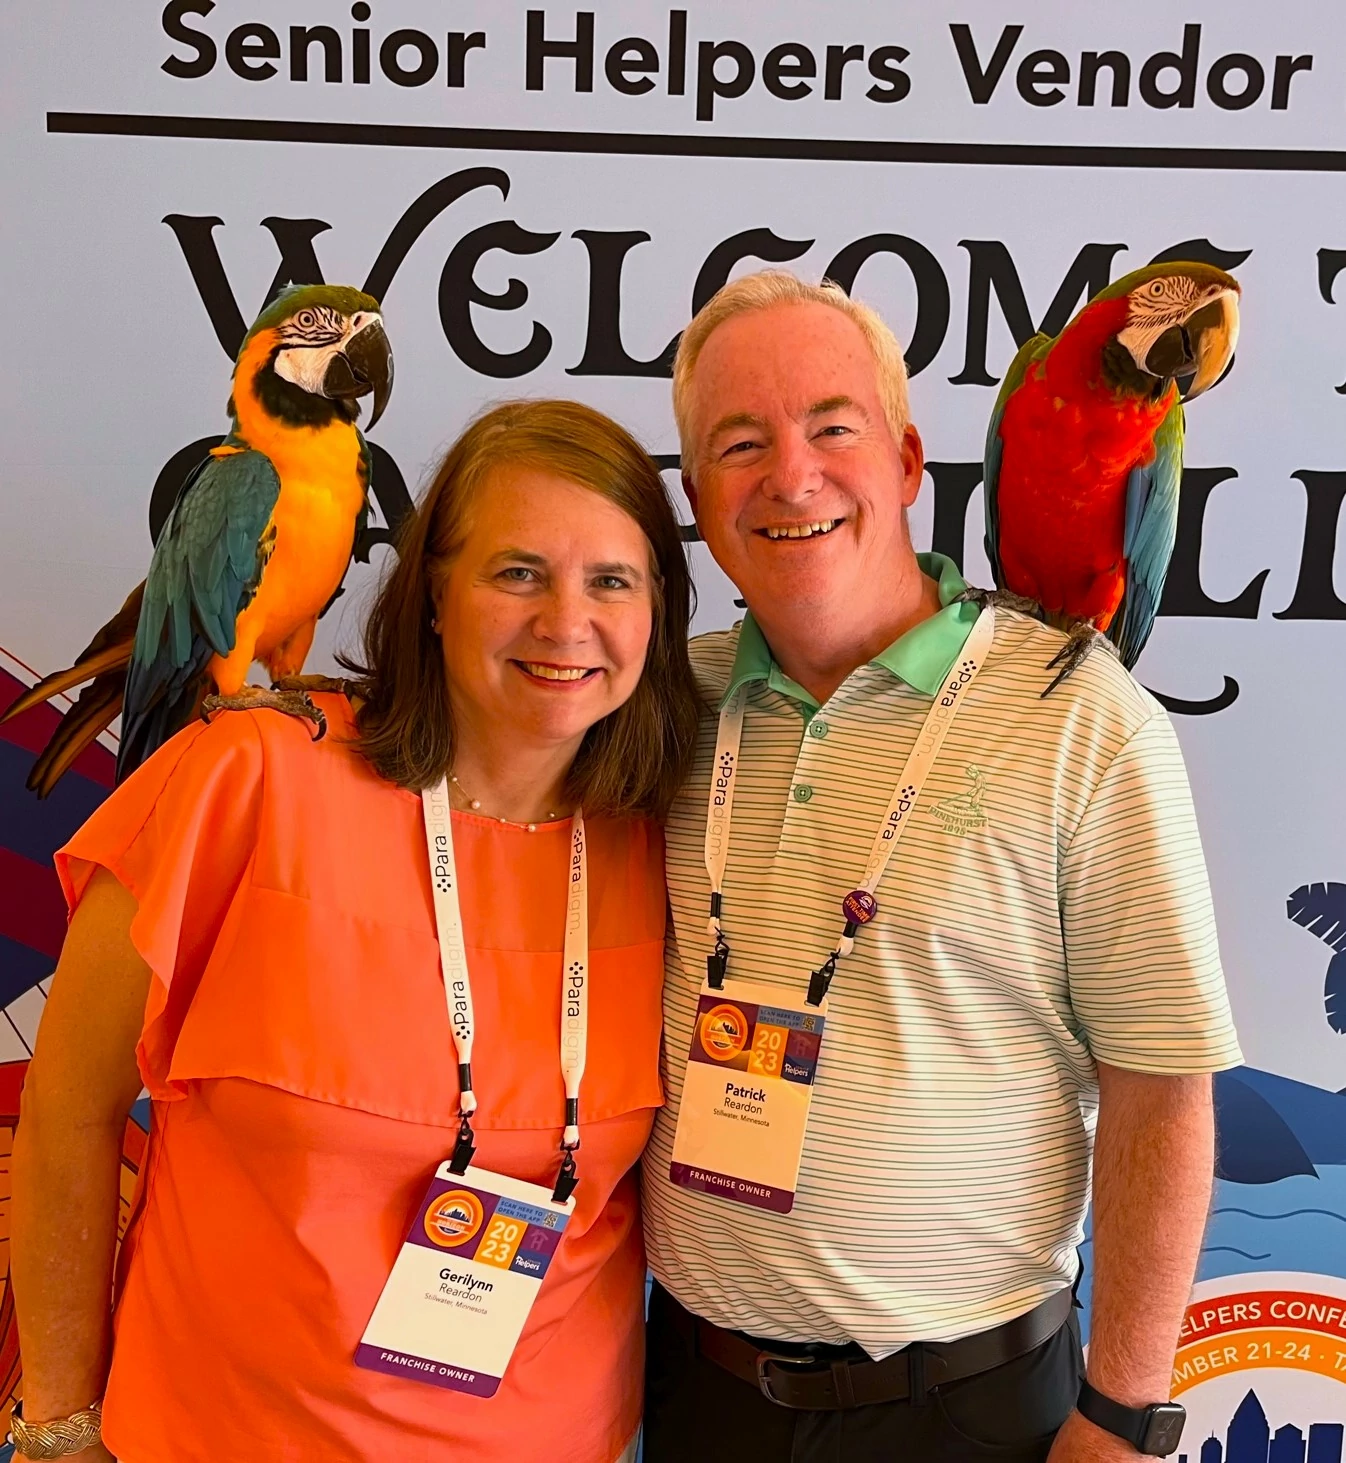 Pat and Geri Reardon pose with a couple macaws at our recent Senior Helpers National Conference in Tampa, FL.